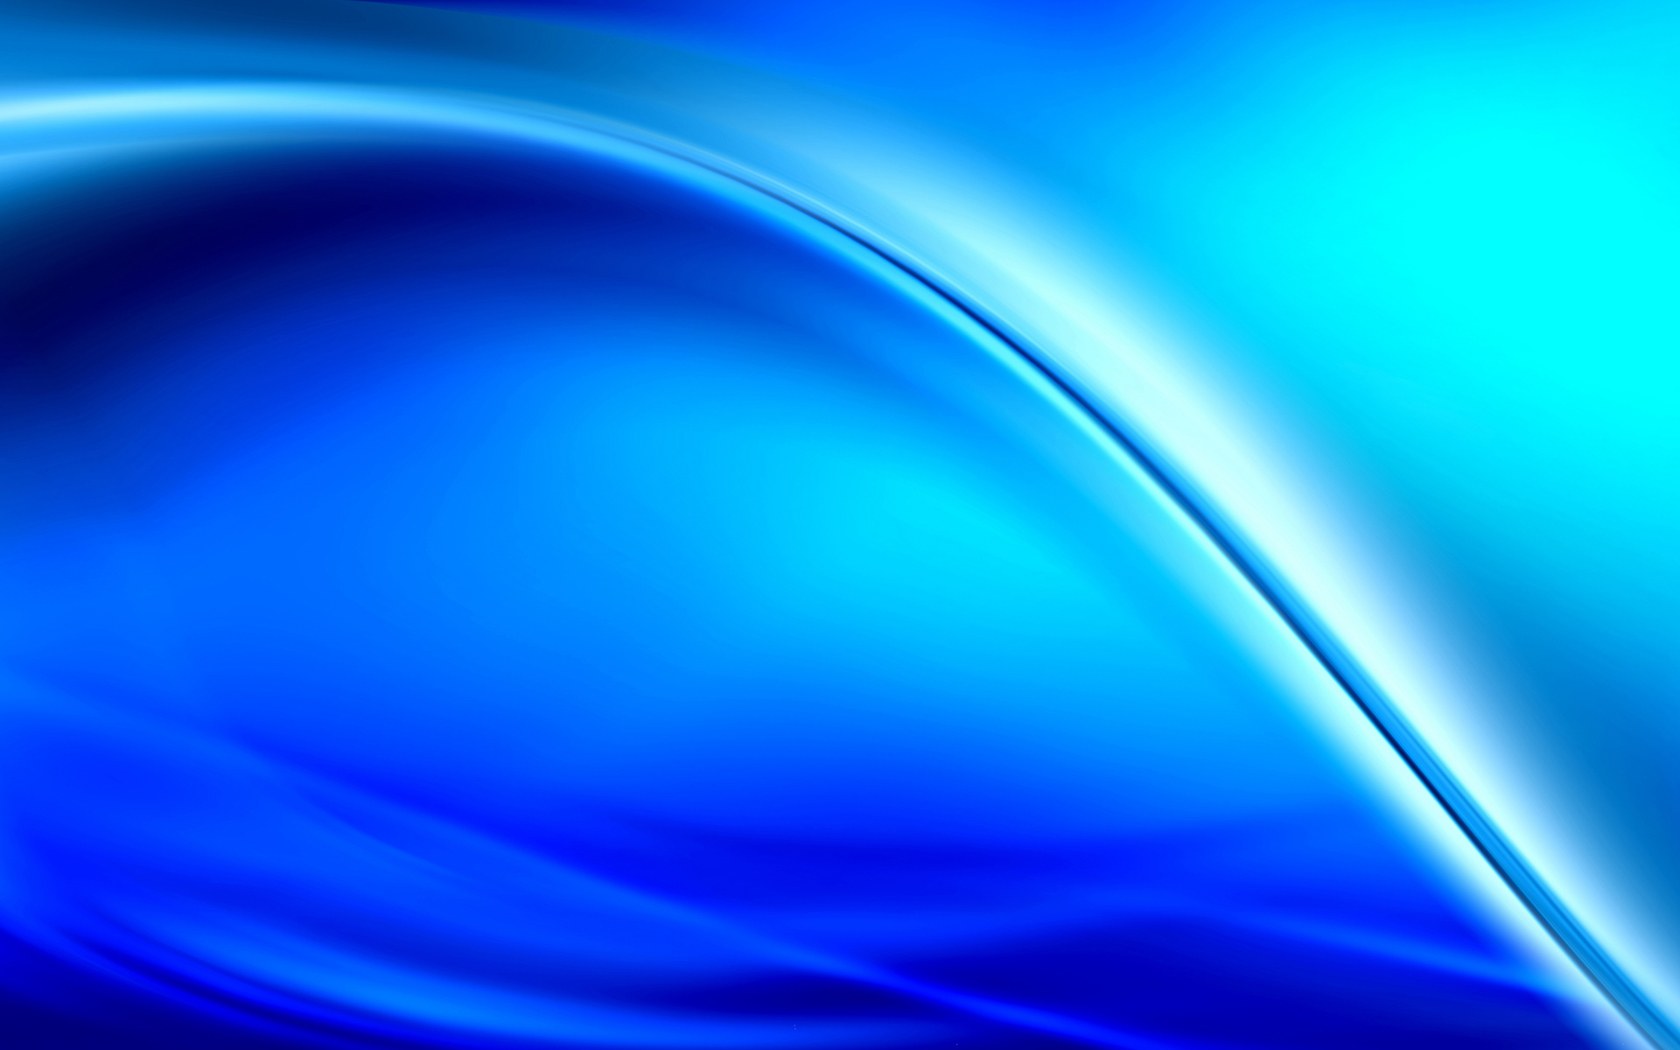  blue background 2015 3 12 hd abstract blue background hd abstract blue